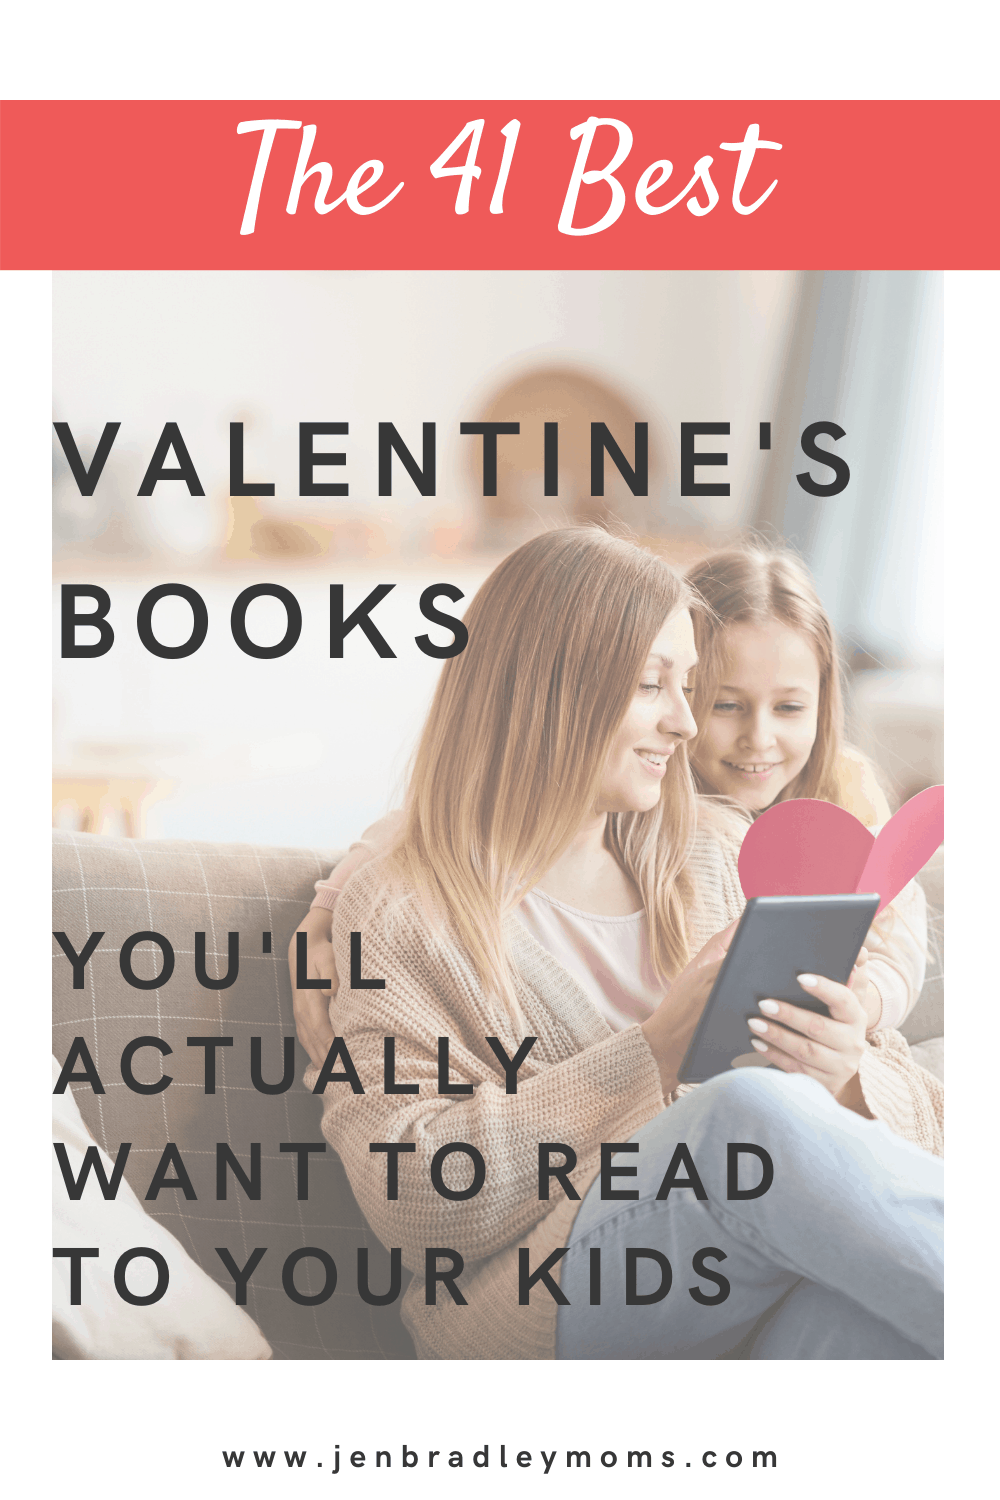 The 41 Best Valentine\'s Books for Kids You Need to Read This Year